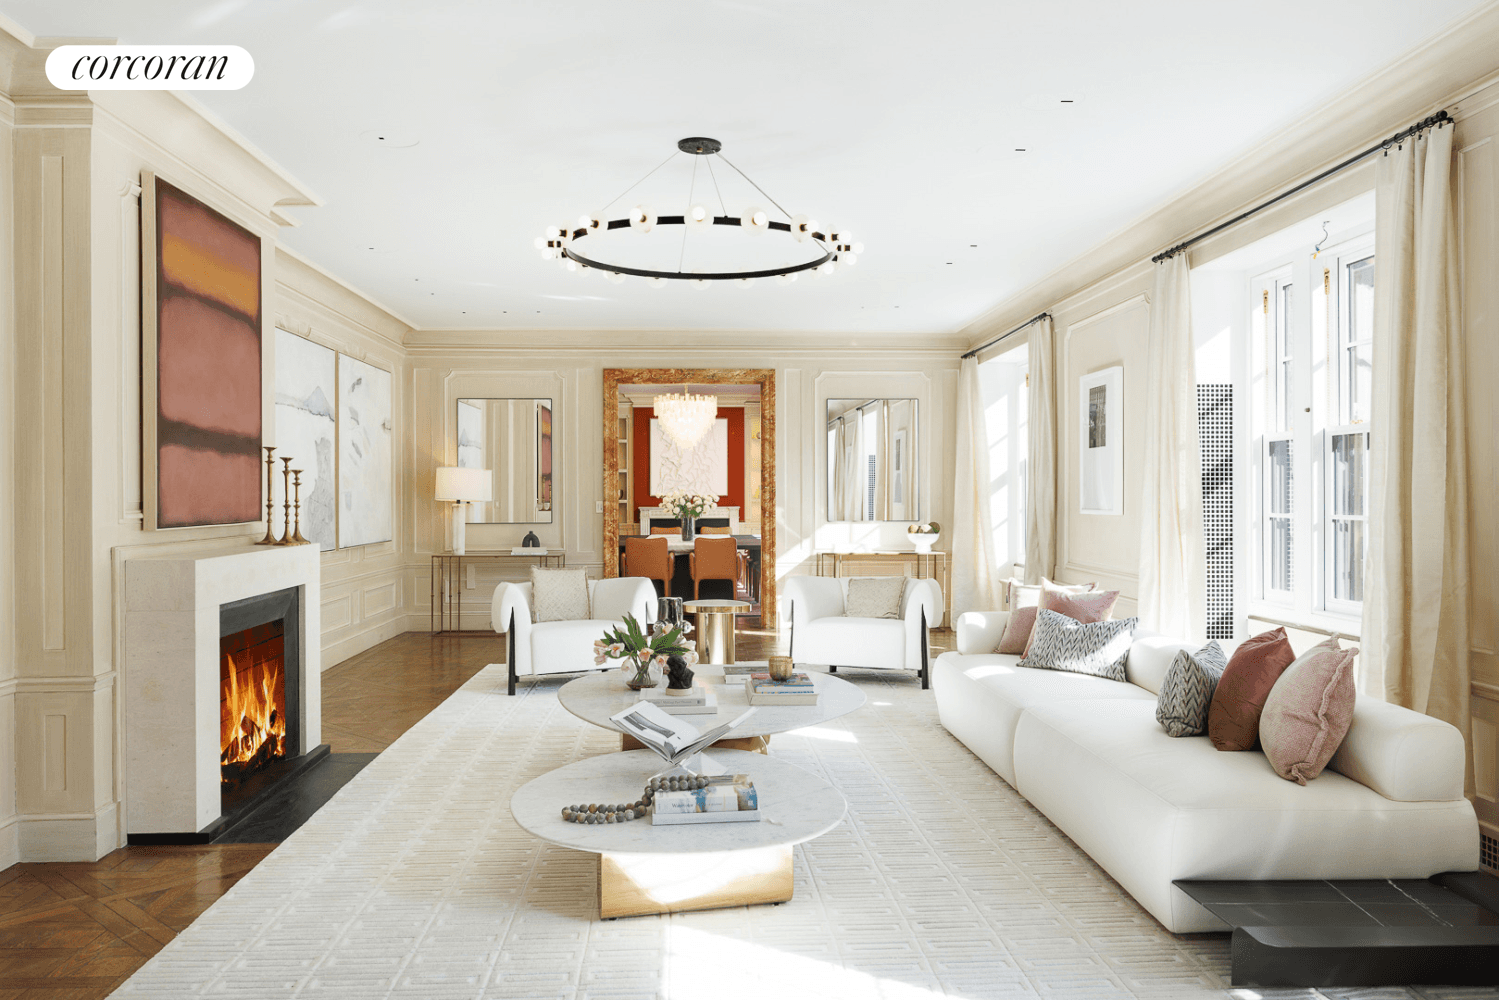 A palatial prewar masterpiece, this grand, corner 26 into 21 room duplex residence boasts perfectly scaled rooms for spectacular entertaining and everyday living.